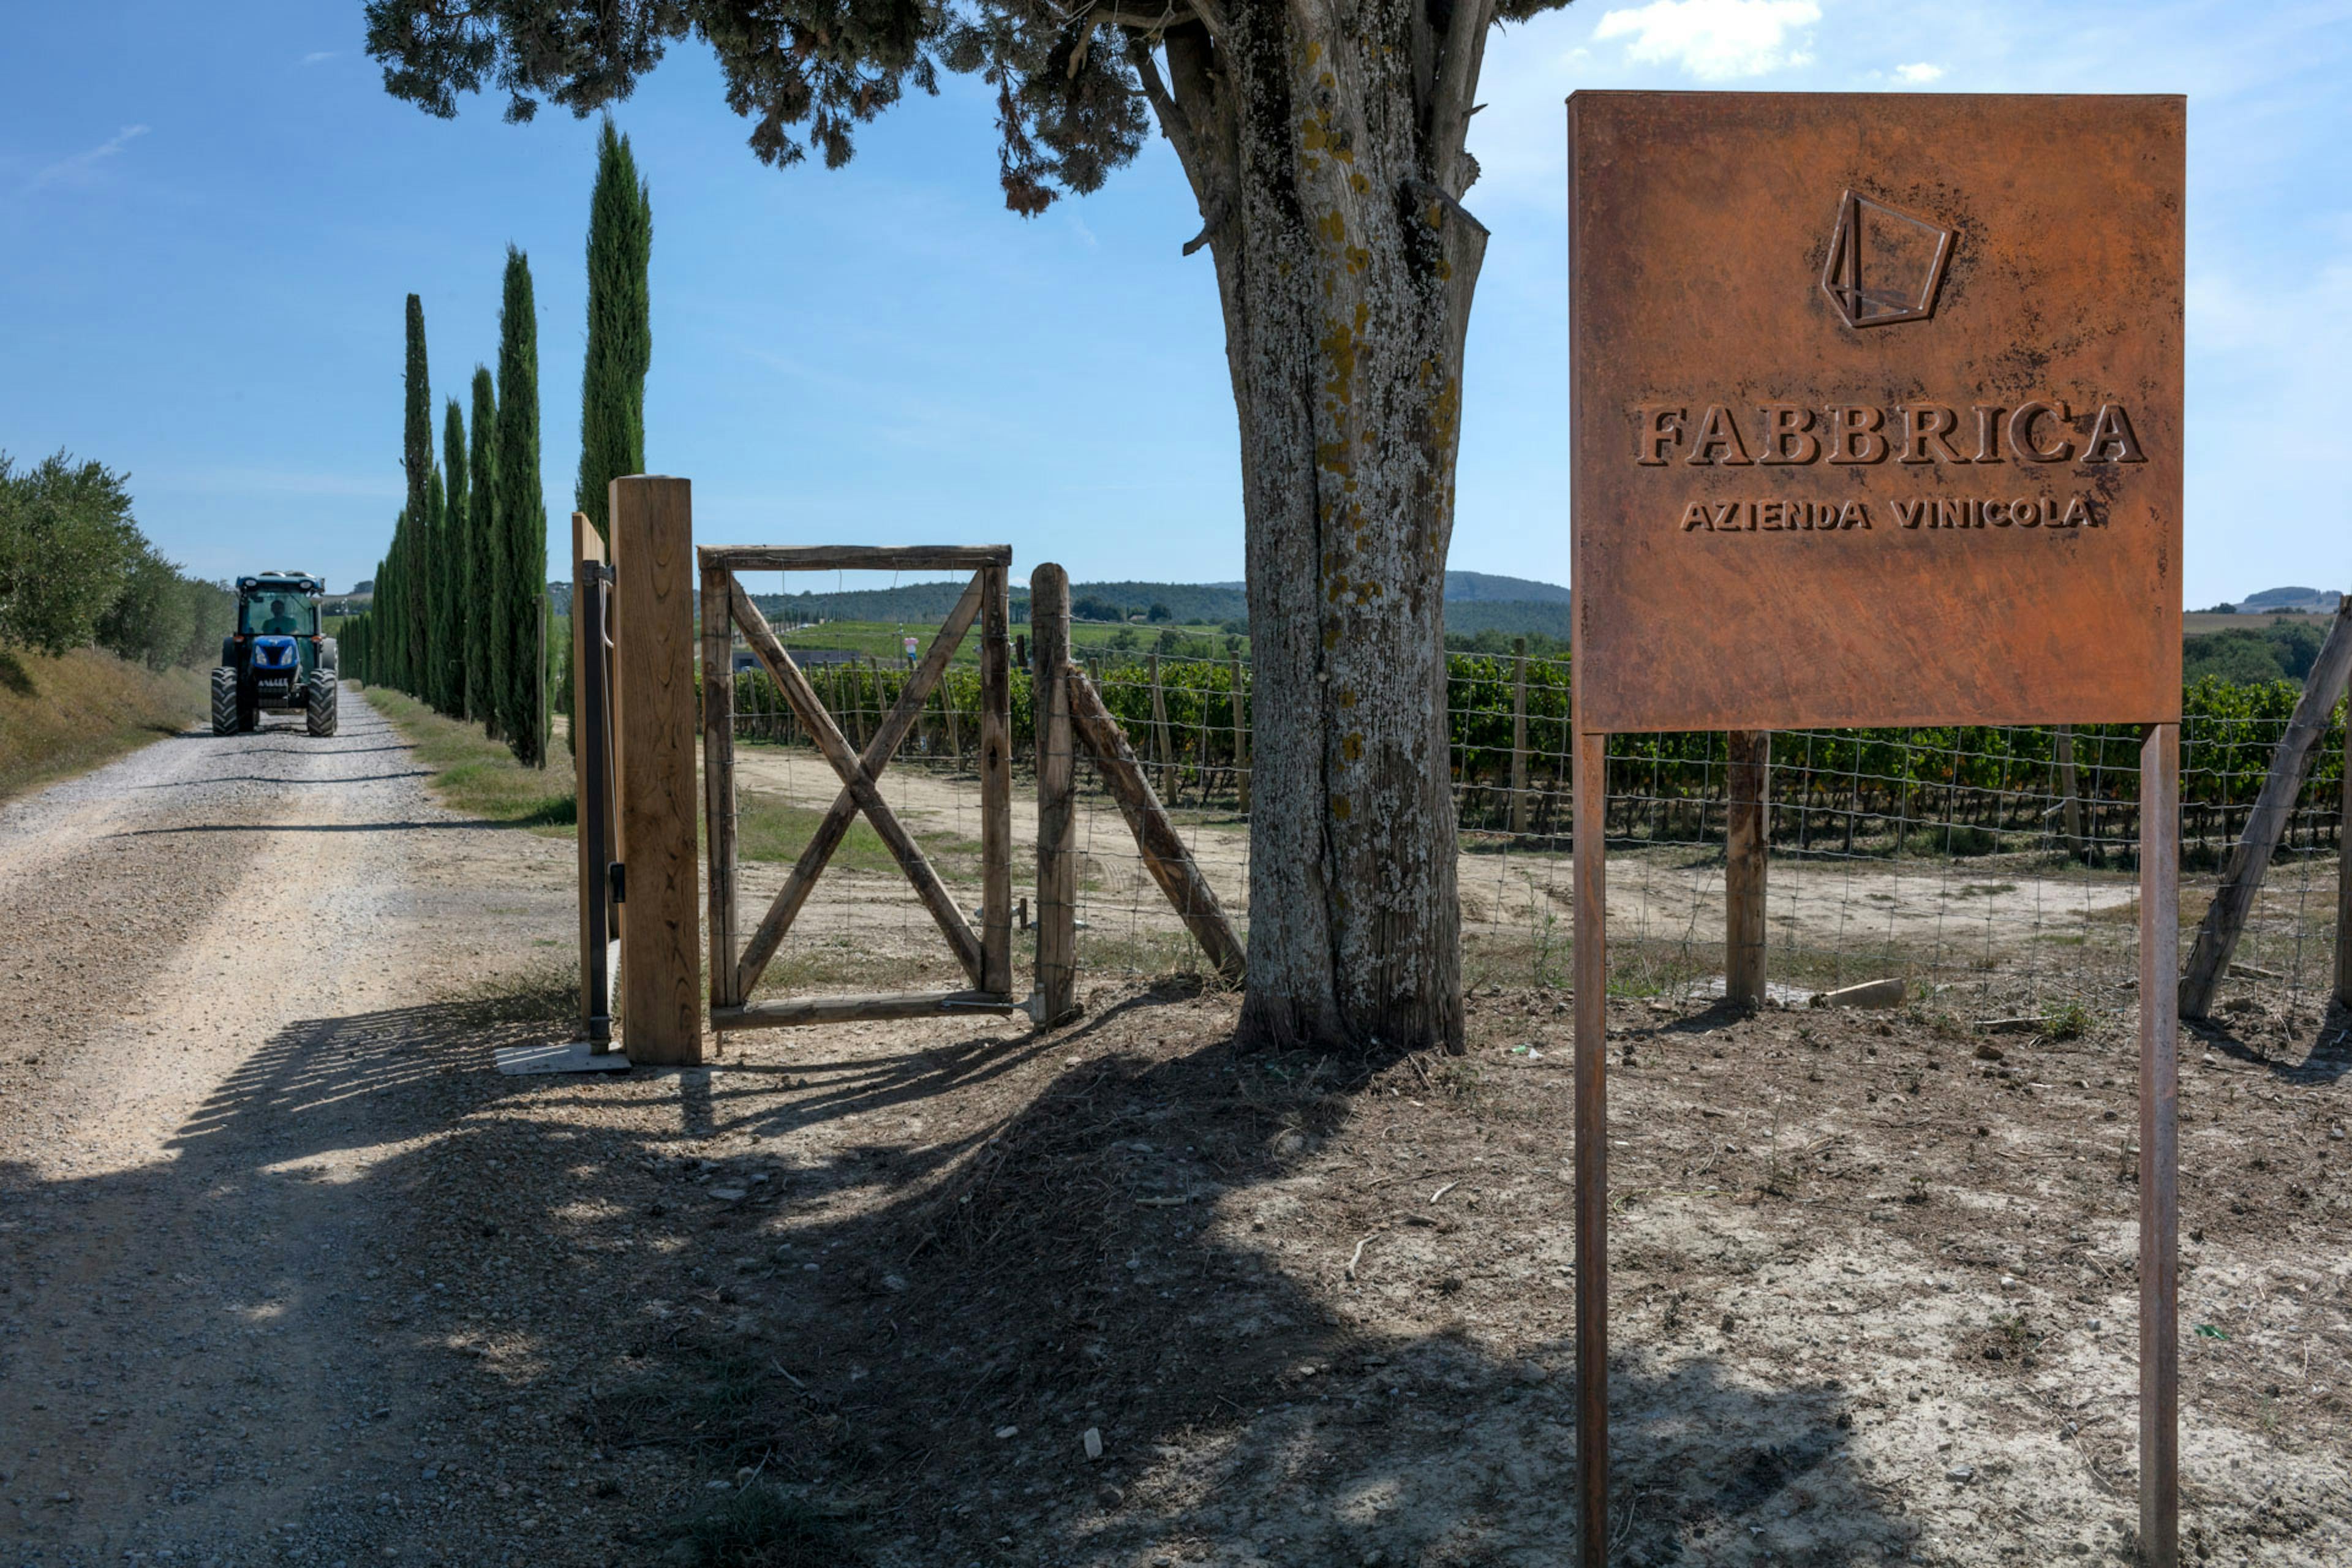 Entrance of Fabbrica with a tractor on the strada bianca, cypresses alongside and the sign of the winery